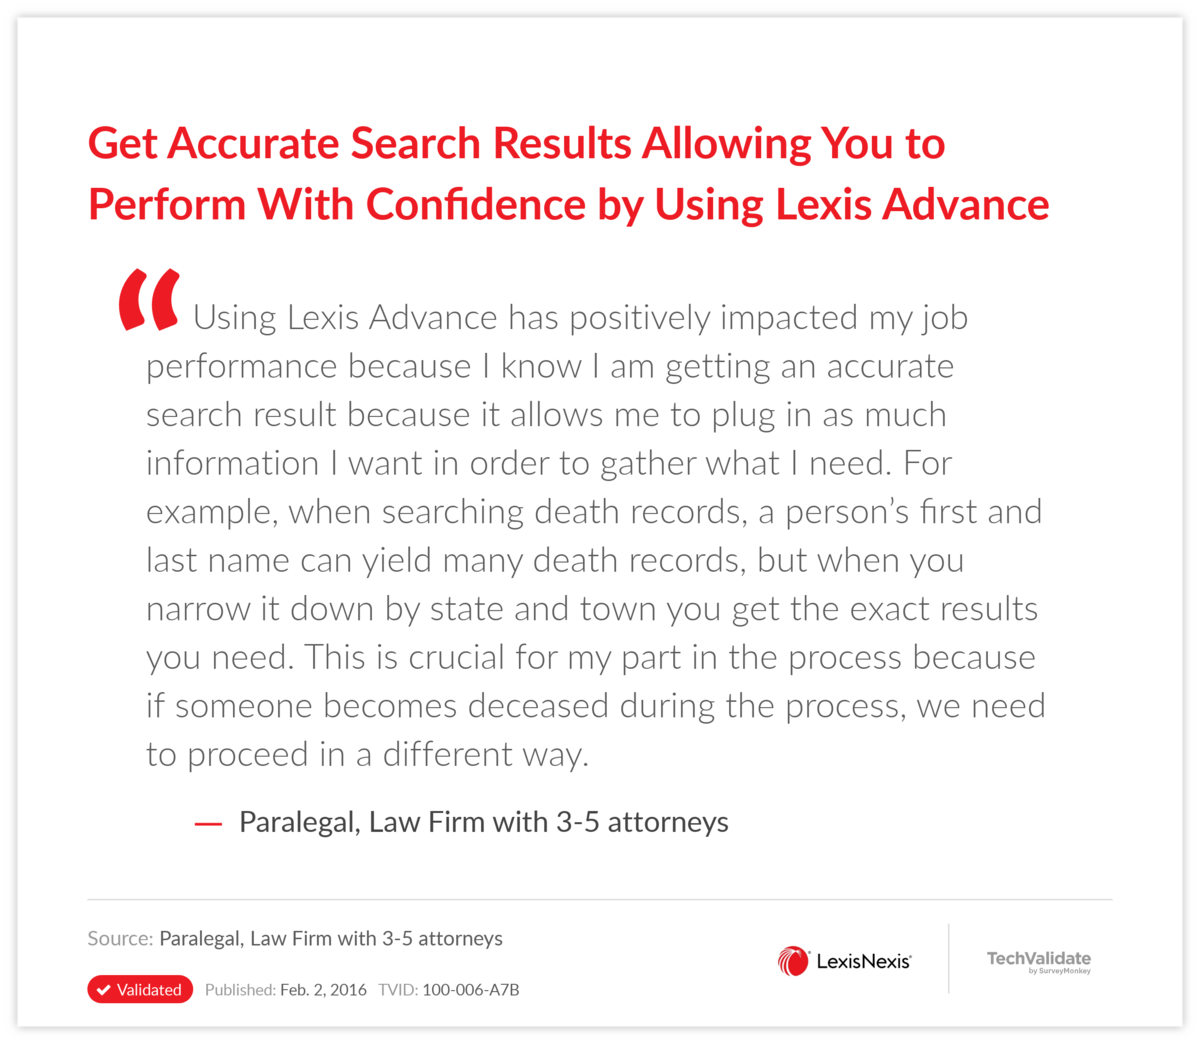 Get Accurate Search Results Allowing You to Perform With Confidence by Using Lexis Advance